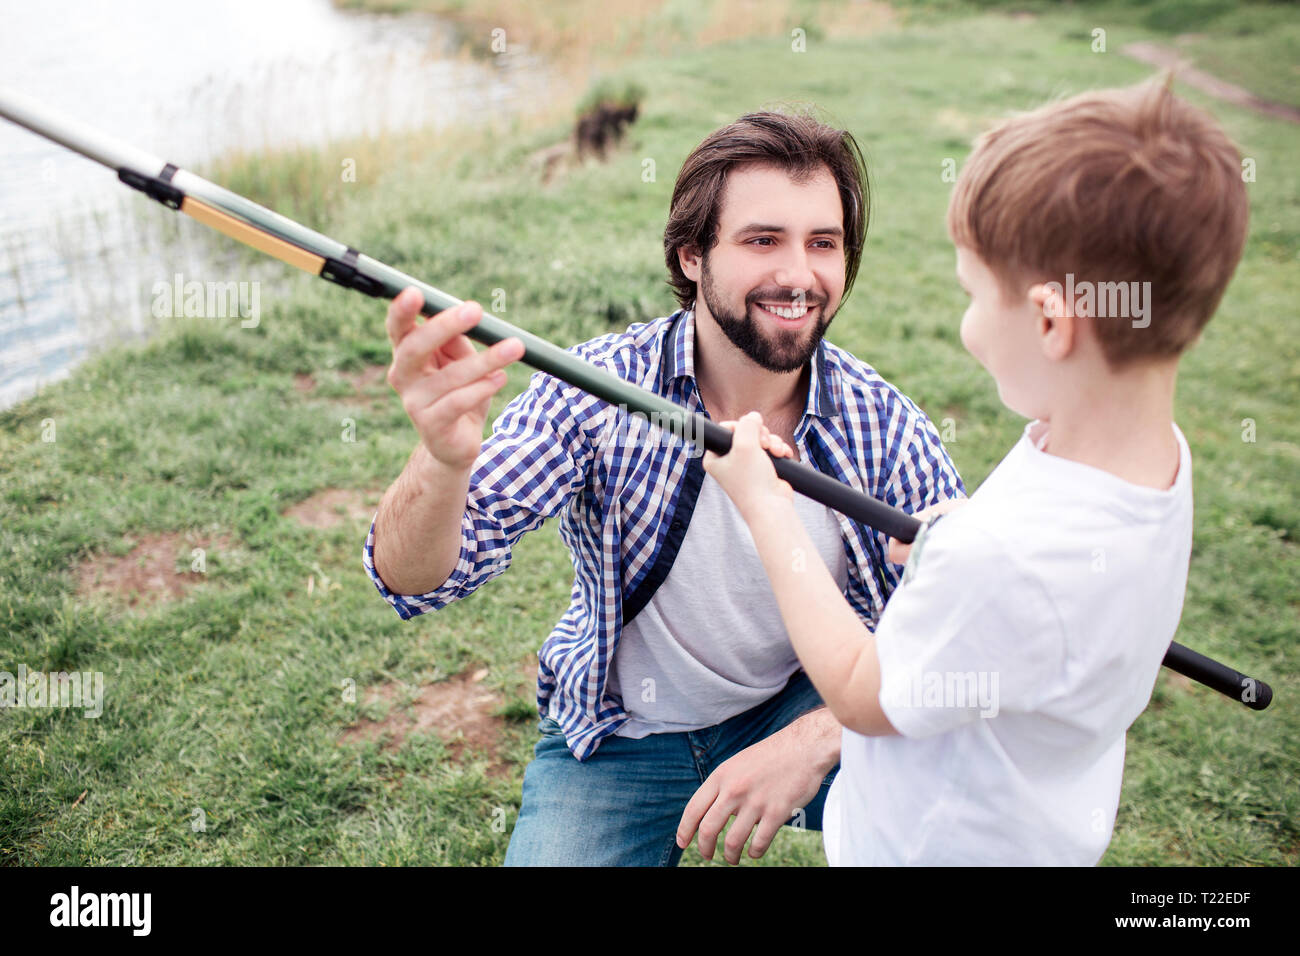 Happy dad is giving fish-rod to his son. He is smiling. Boy is holding fish-rod very tight and looking at dad Stock Photo